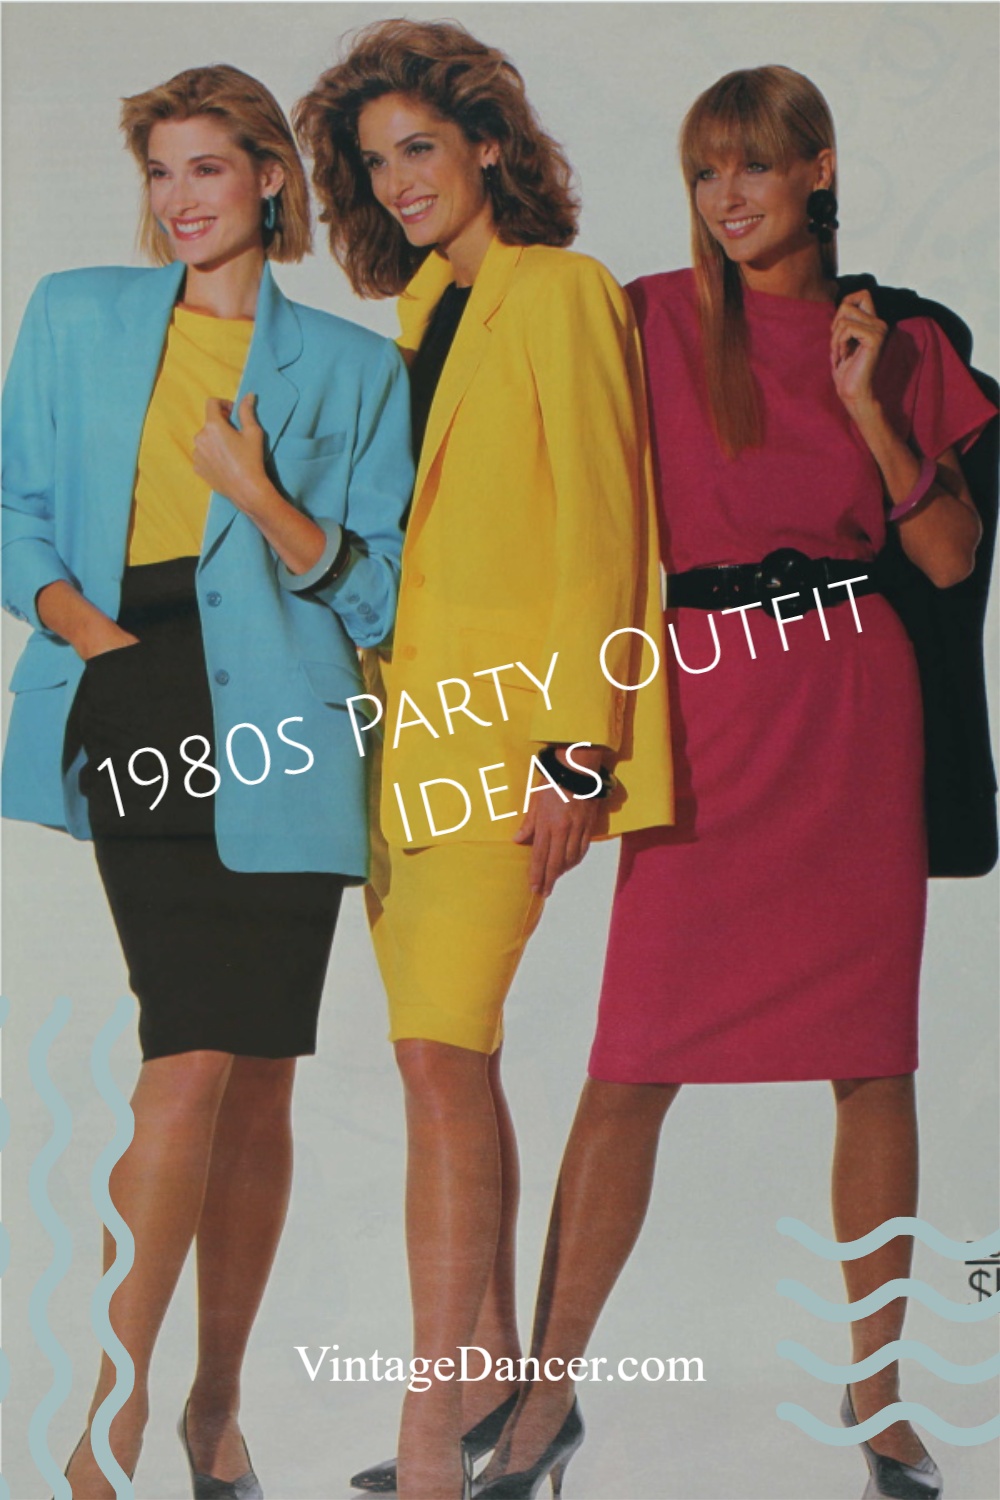 The Best 80's Party Outfit Ideas, Costumes From The 80's